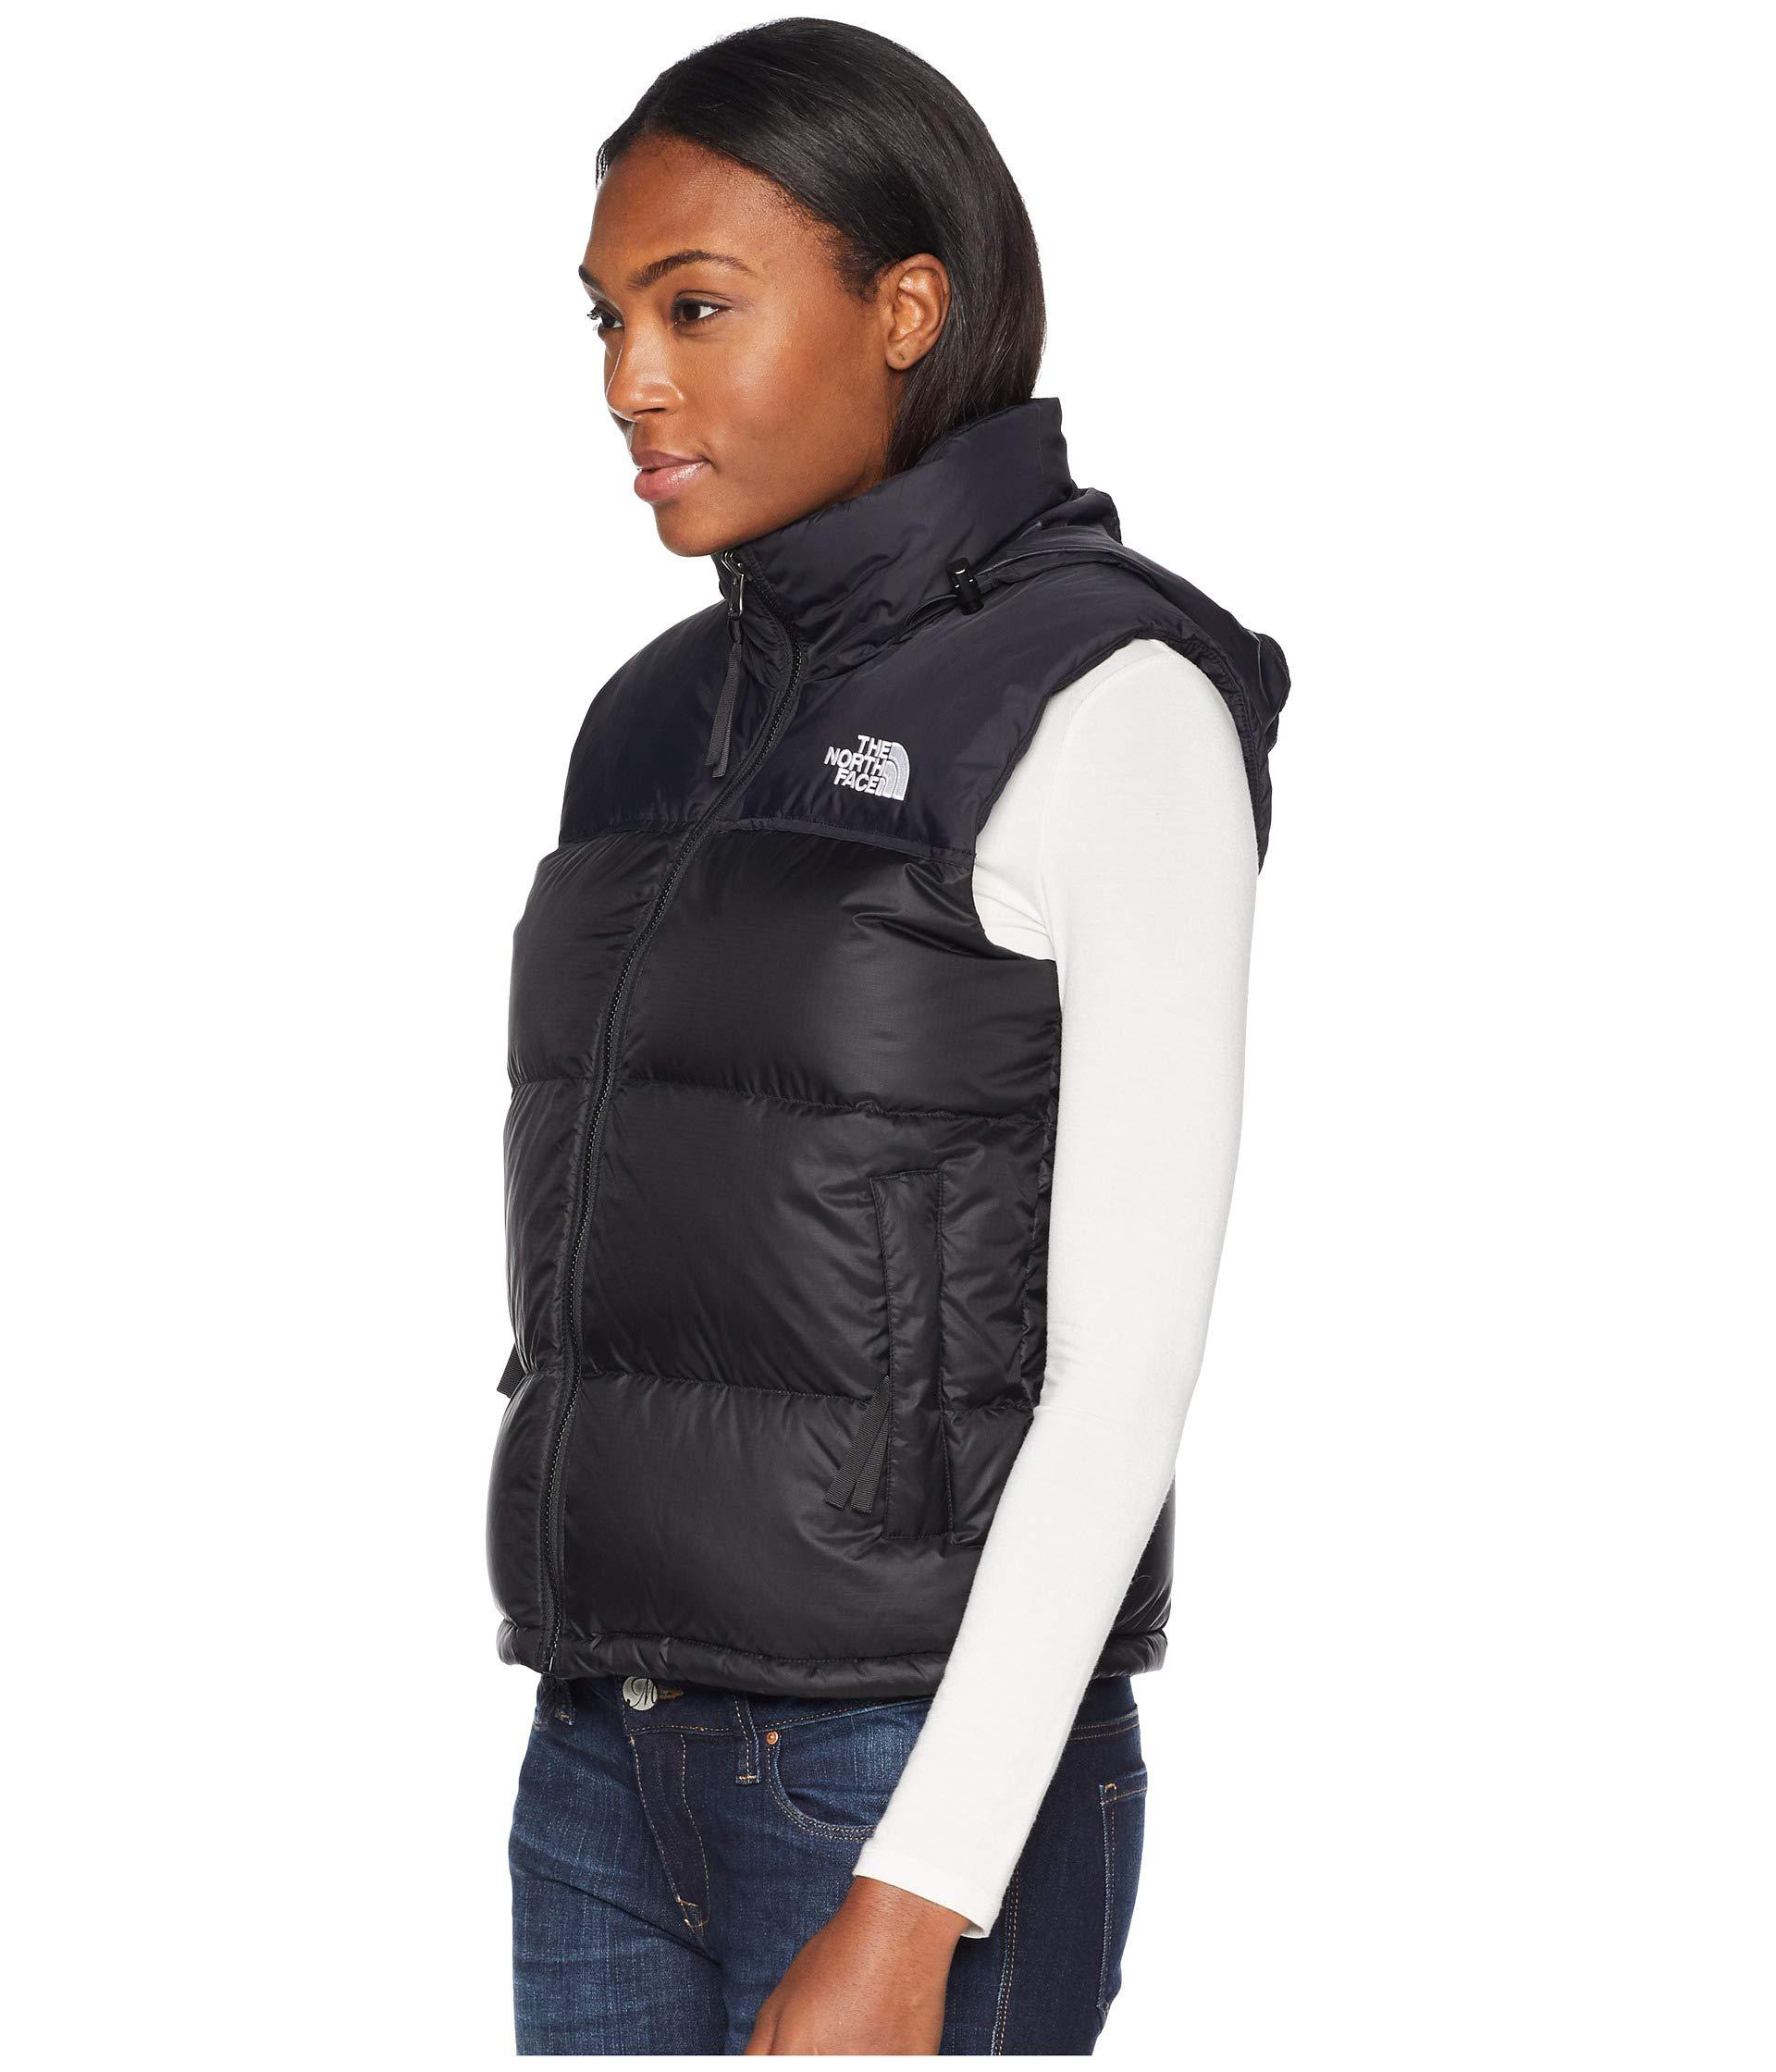 north face puffer vest womens